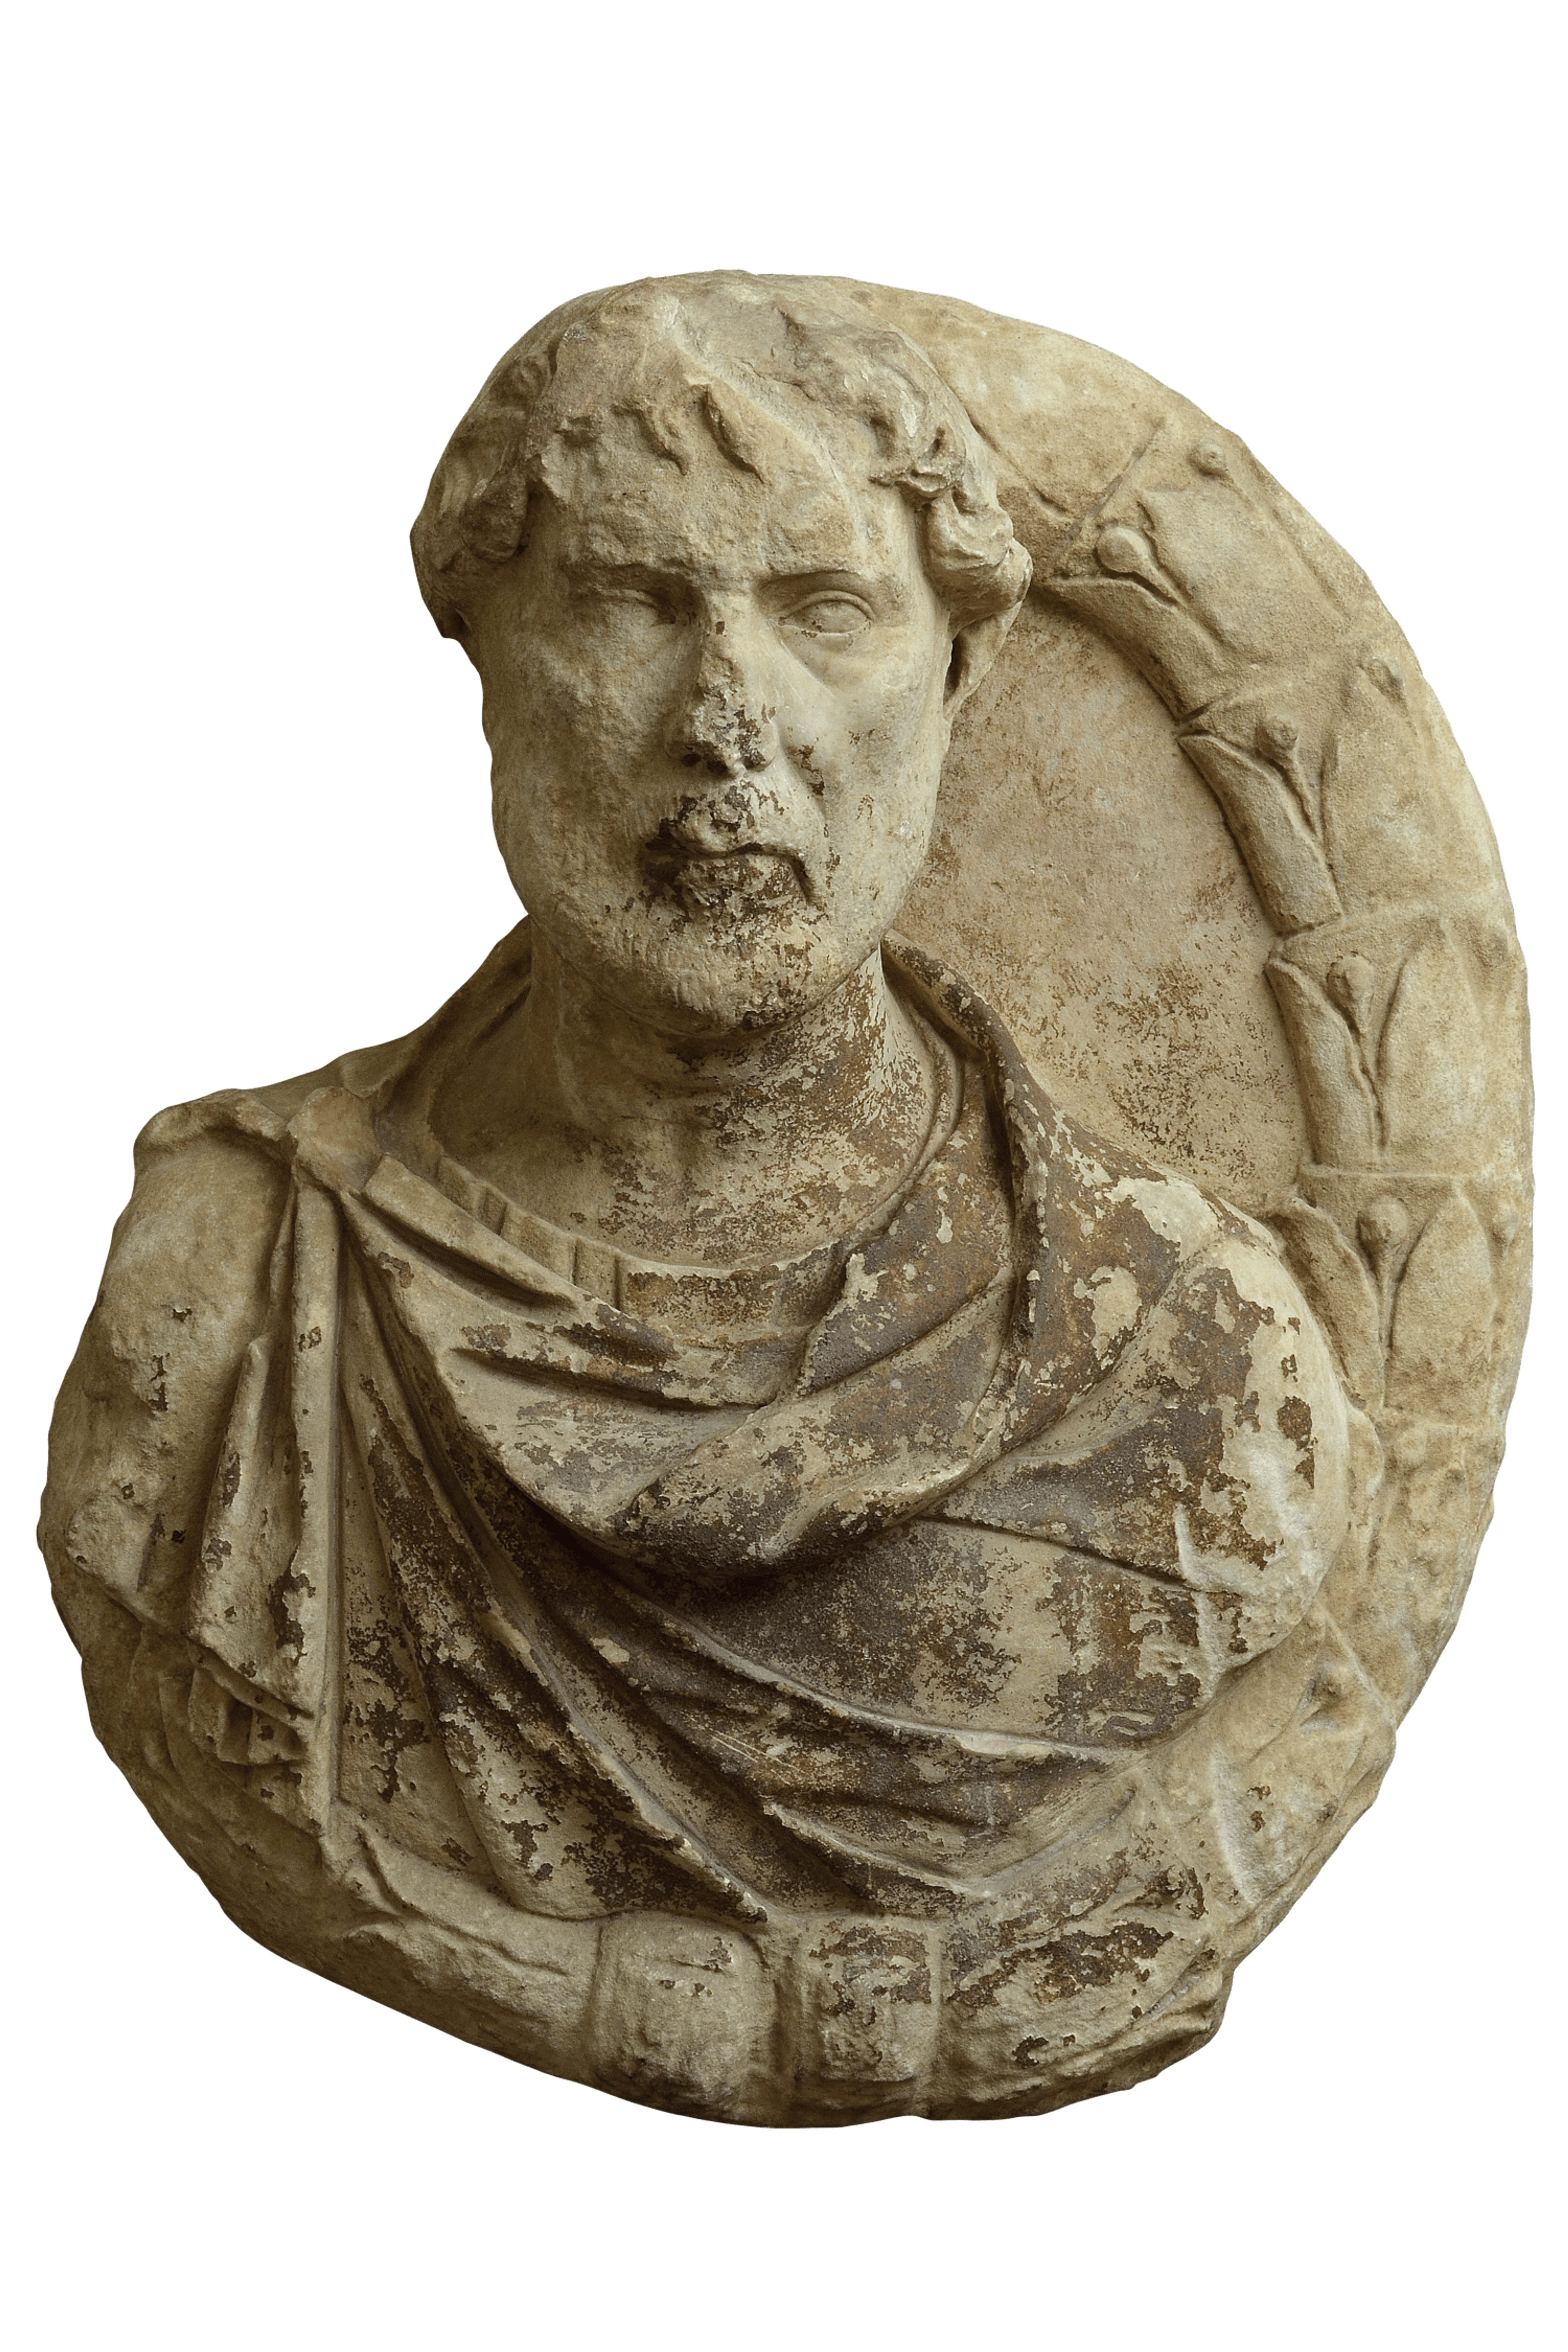 Male bust within laurel wreath